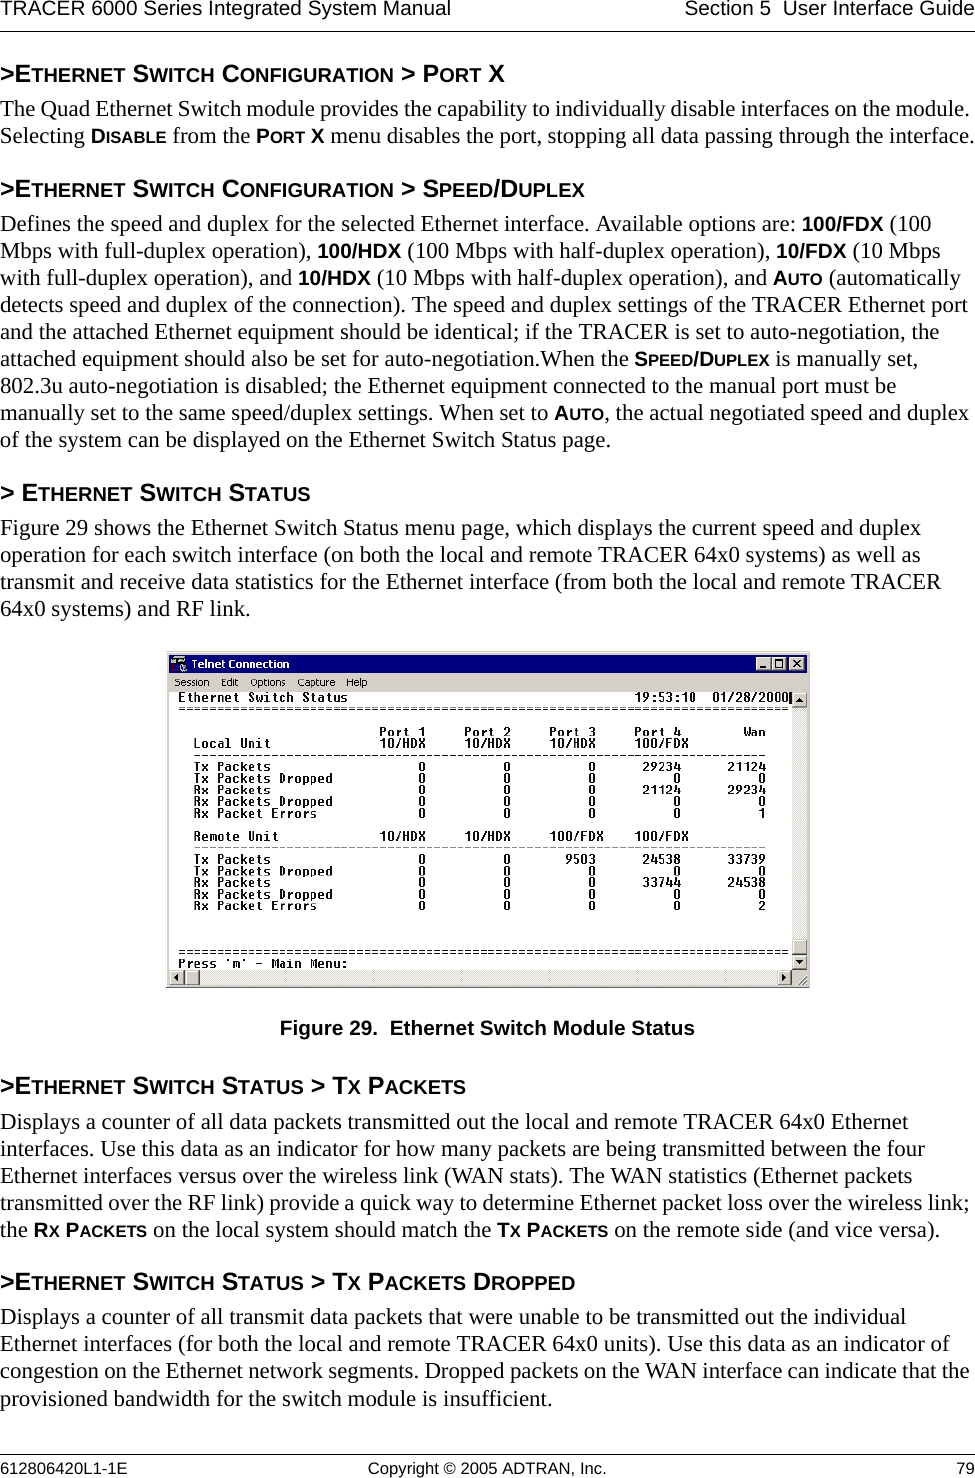 TRACER 6000 Series Integrated System Manual Section 5  User Interface Guide612806420L1-1E Copyright © 2005 ADTRAN, Inc. 79&gt;ETHERNET SWITCH CONFIGURATION &gt; PORT XThe Quad Ethernet Switch module provides the capability to individually disable interfaces on the module. Selecting DISABLE from the PORT X menu disables the port, stopping all data passing through the interface.&gt;ETHERNET SWITCH CONFIGURATION &gt; SPEED/DUPLEXDefines the speed and duplex for the selected Ethernet interface. Available options are: 100/FDX (100 Mbps with full-duplex operation), 100/HDX (100 Mbps with half-duplex operation), 10/FDX (10 Mbps with full-duplex operation), and 10/HDX (10 Mbps with half-duplex operation), and AUTO (automatically detects speed and duplex of the connection). The speed and duplex settings of the TRACER Ethernet port and the attached Ethernet equipment should be identical; if the TRACER is set to auto-negotiation, the attached equipment should also be set for auto-negotiation.When the SPEED/DUPLEX is manually set, 802.3u auto-negotiation is disabled; the Ethernet equipment connected to the manual port must be manually set to the same speed/duplex settings. When set to AUTO, the actual negotiated speed and duplex of the system can be displayed on the Ethernet Switch Status page.&gt; ETHERNET SWITCH STATUSFigure 29 shows the Ethernet Switch Status menu page, which displays the current speed and duplex operation for each switch interface (on both the local and remote TRACER 64x0 systems) as well as transmit and receive data statistics for the Ethernet interface (from both the local and remote TRACER 64x0 systems) and RF link.Figure 29.  Ethernet Switch Module Status&gt;ETHERNET SWITCH STATUS &gt; TX PACKETSDisplays a counter of all data packets transmitted out the local and remote TRACER 64x0 Ethernet interfaces. Use this data as an indicator for how many packets are being transmitted between the four Ethernet interfaces versus over the wireless link (WAN stats). The WAN statistics (Ethernet packets transmitted over the RF link) provide a quick way to determine Ethernet packet loss over the wireless link; the RX PACKETS on the local system should match the TX PACKETS on the remote side (and vice versa).&gt;ETHERNET SWITCH STATUS &gt; TX PACKETS DROPPEDDisplays a counter of all transmit data packets that were unable to be transmitted out the individual Ethernet interfaces (for both the local and remote TRACER 64x0 units). Use this data as an indicator of congestion on the Ethernet network segments. Dropped packets on the WAN interface can indicate that the provisioned bandwidth for the switch module is insufficient.